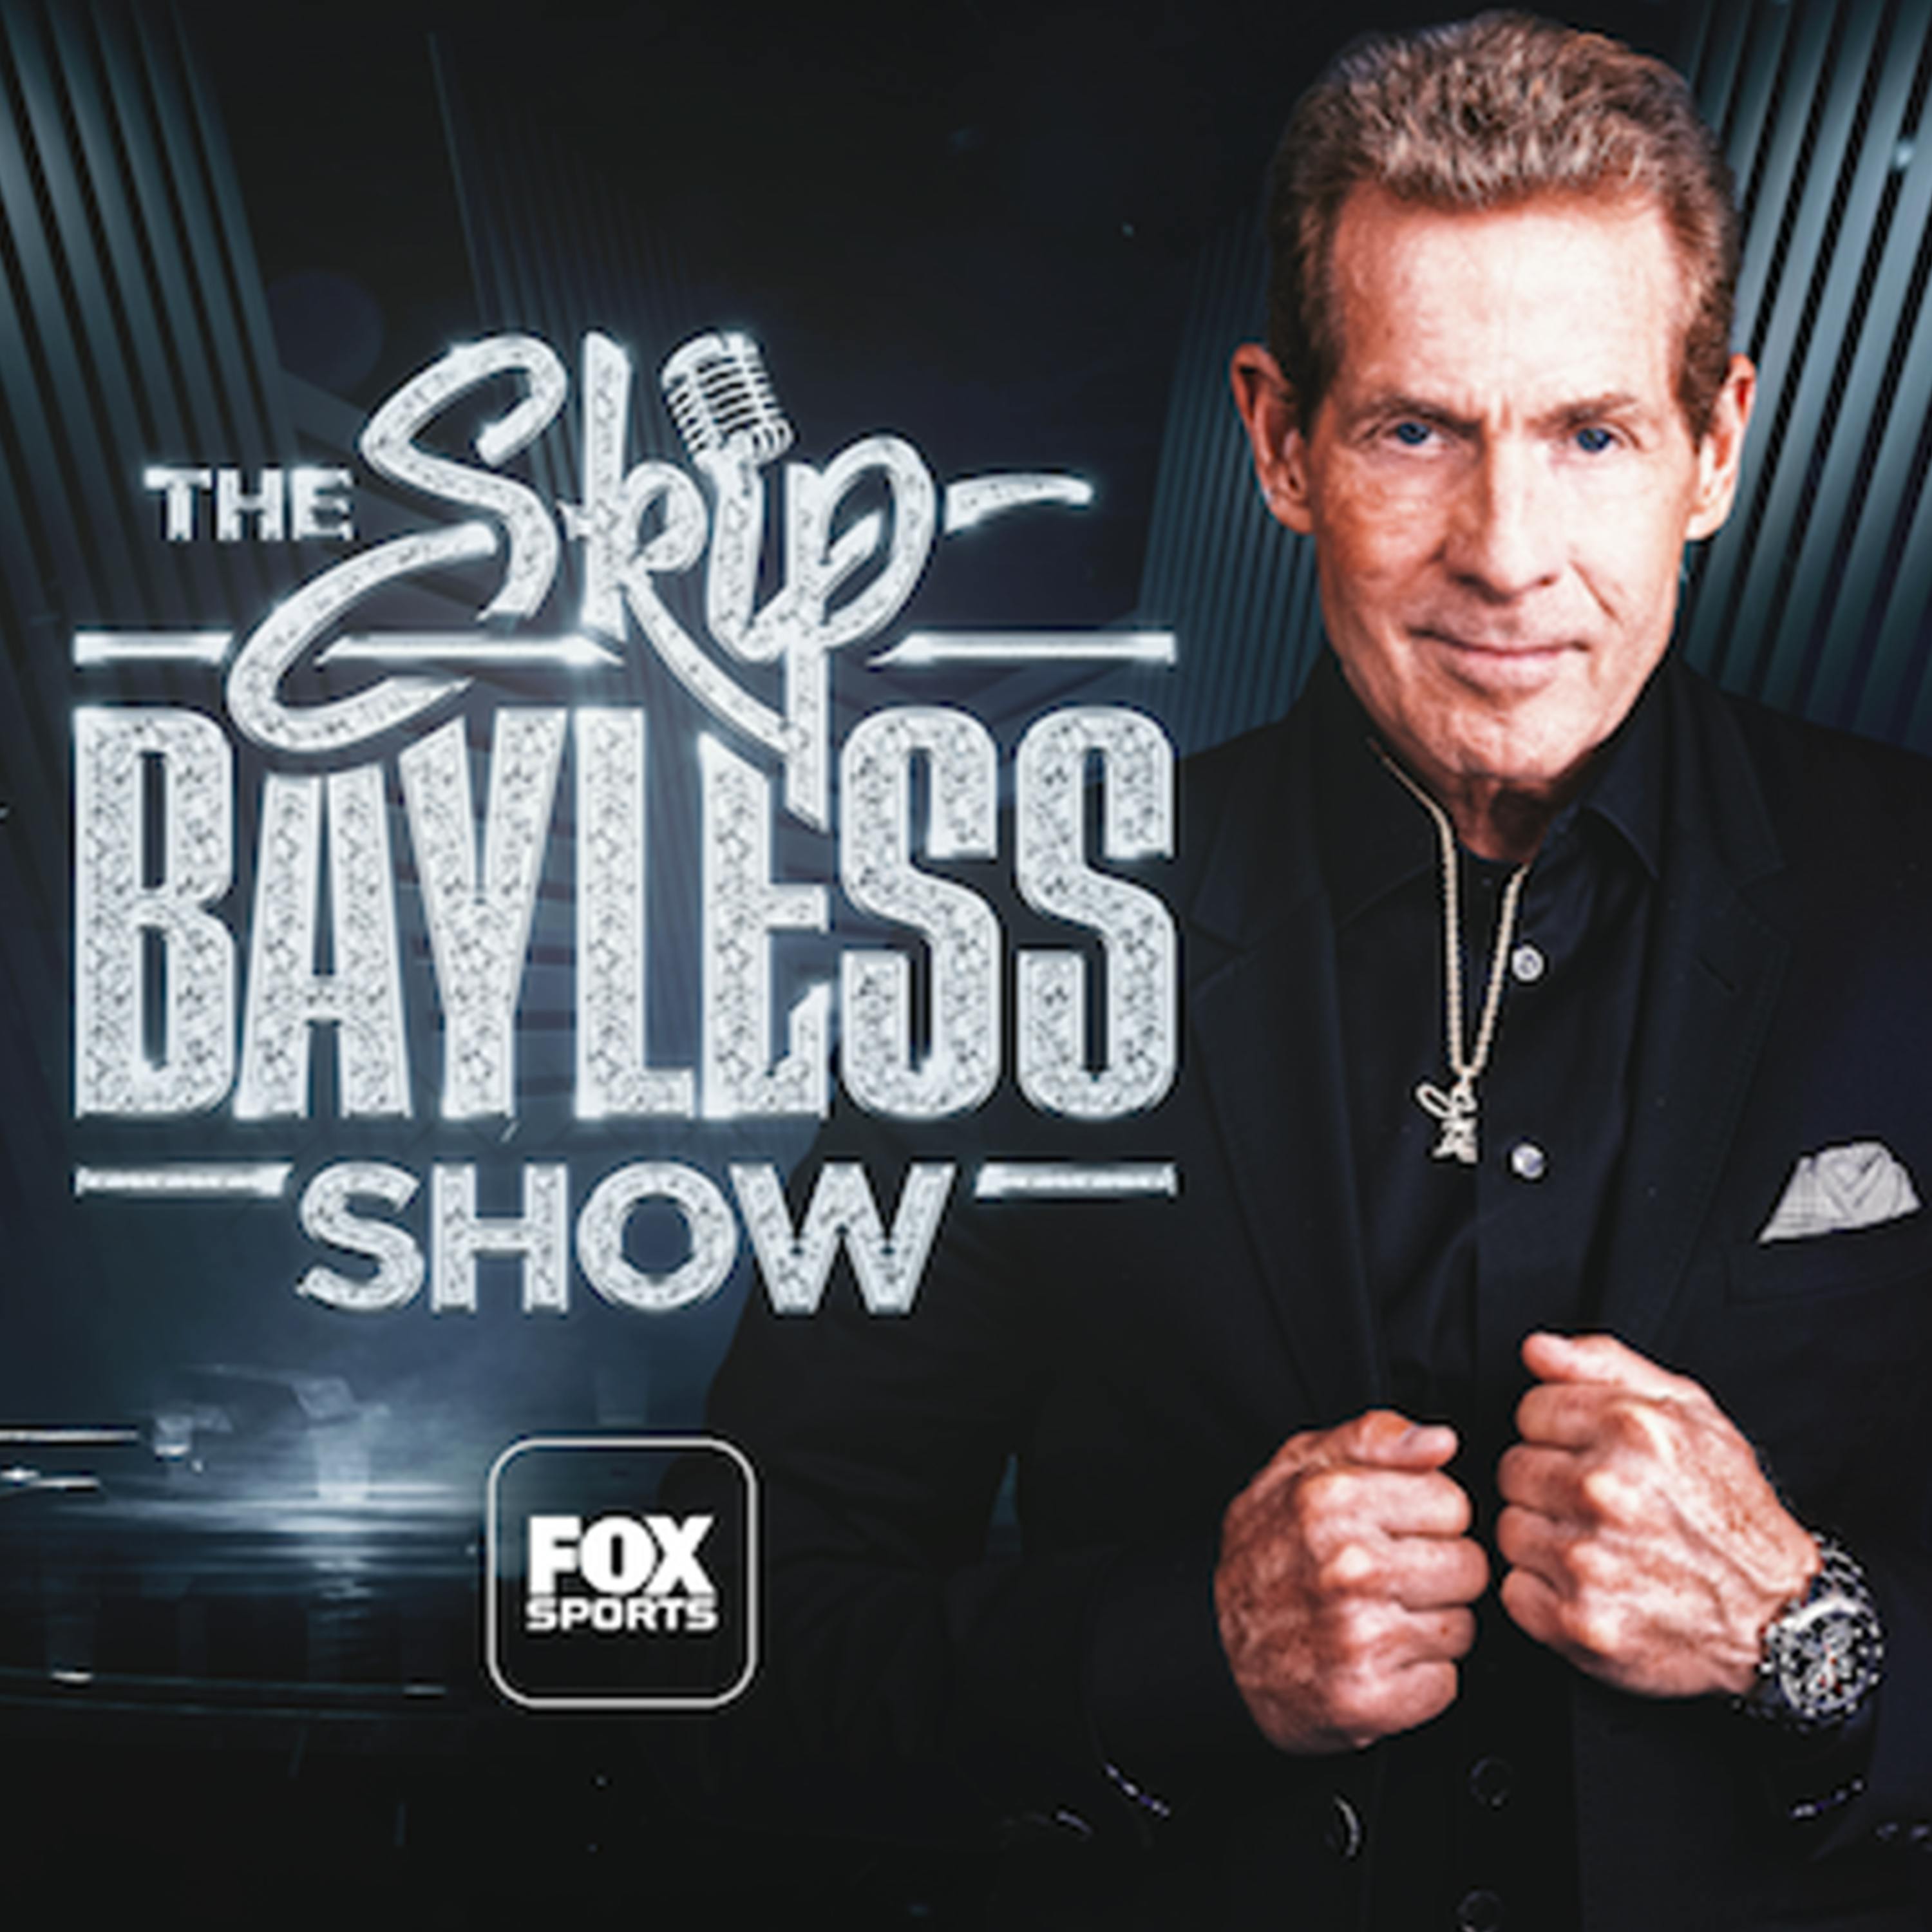 THE SKIP BAYLESS SHOW: The 